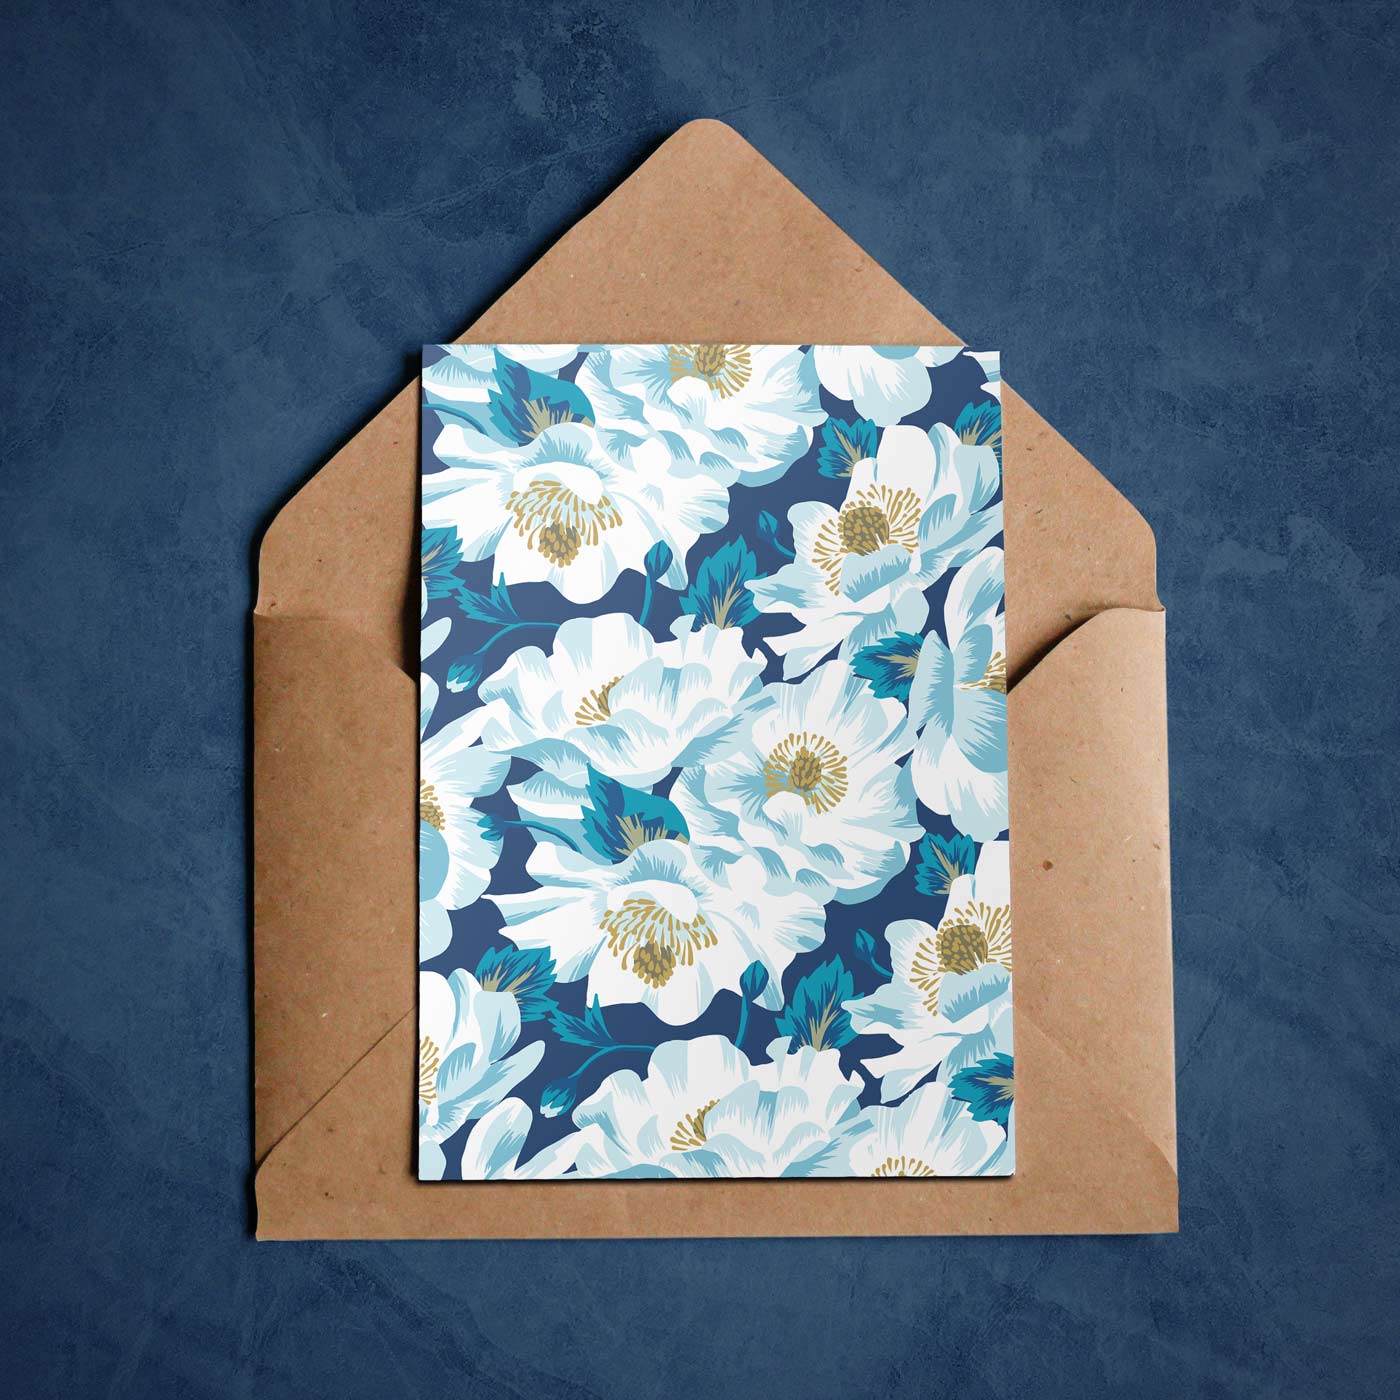 New Zealand Mount Cook lily white and navy floral print greeting card by Andrea Muller